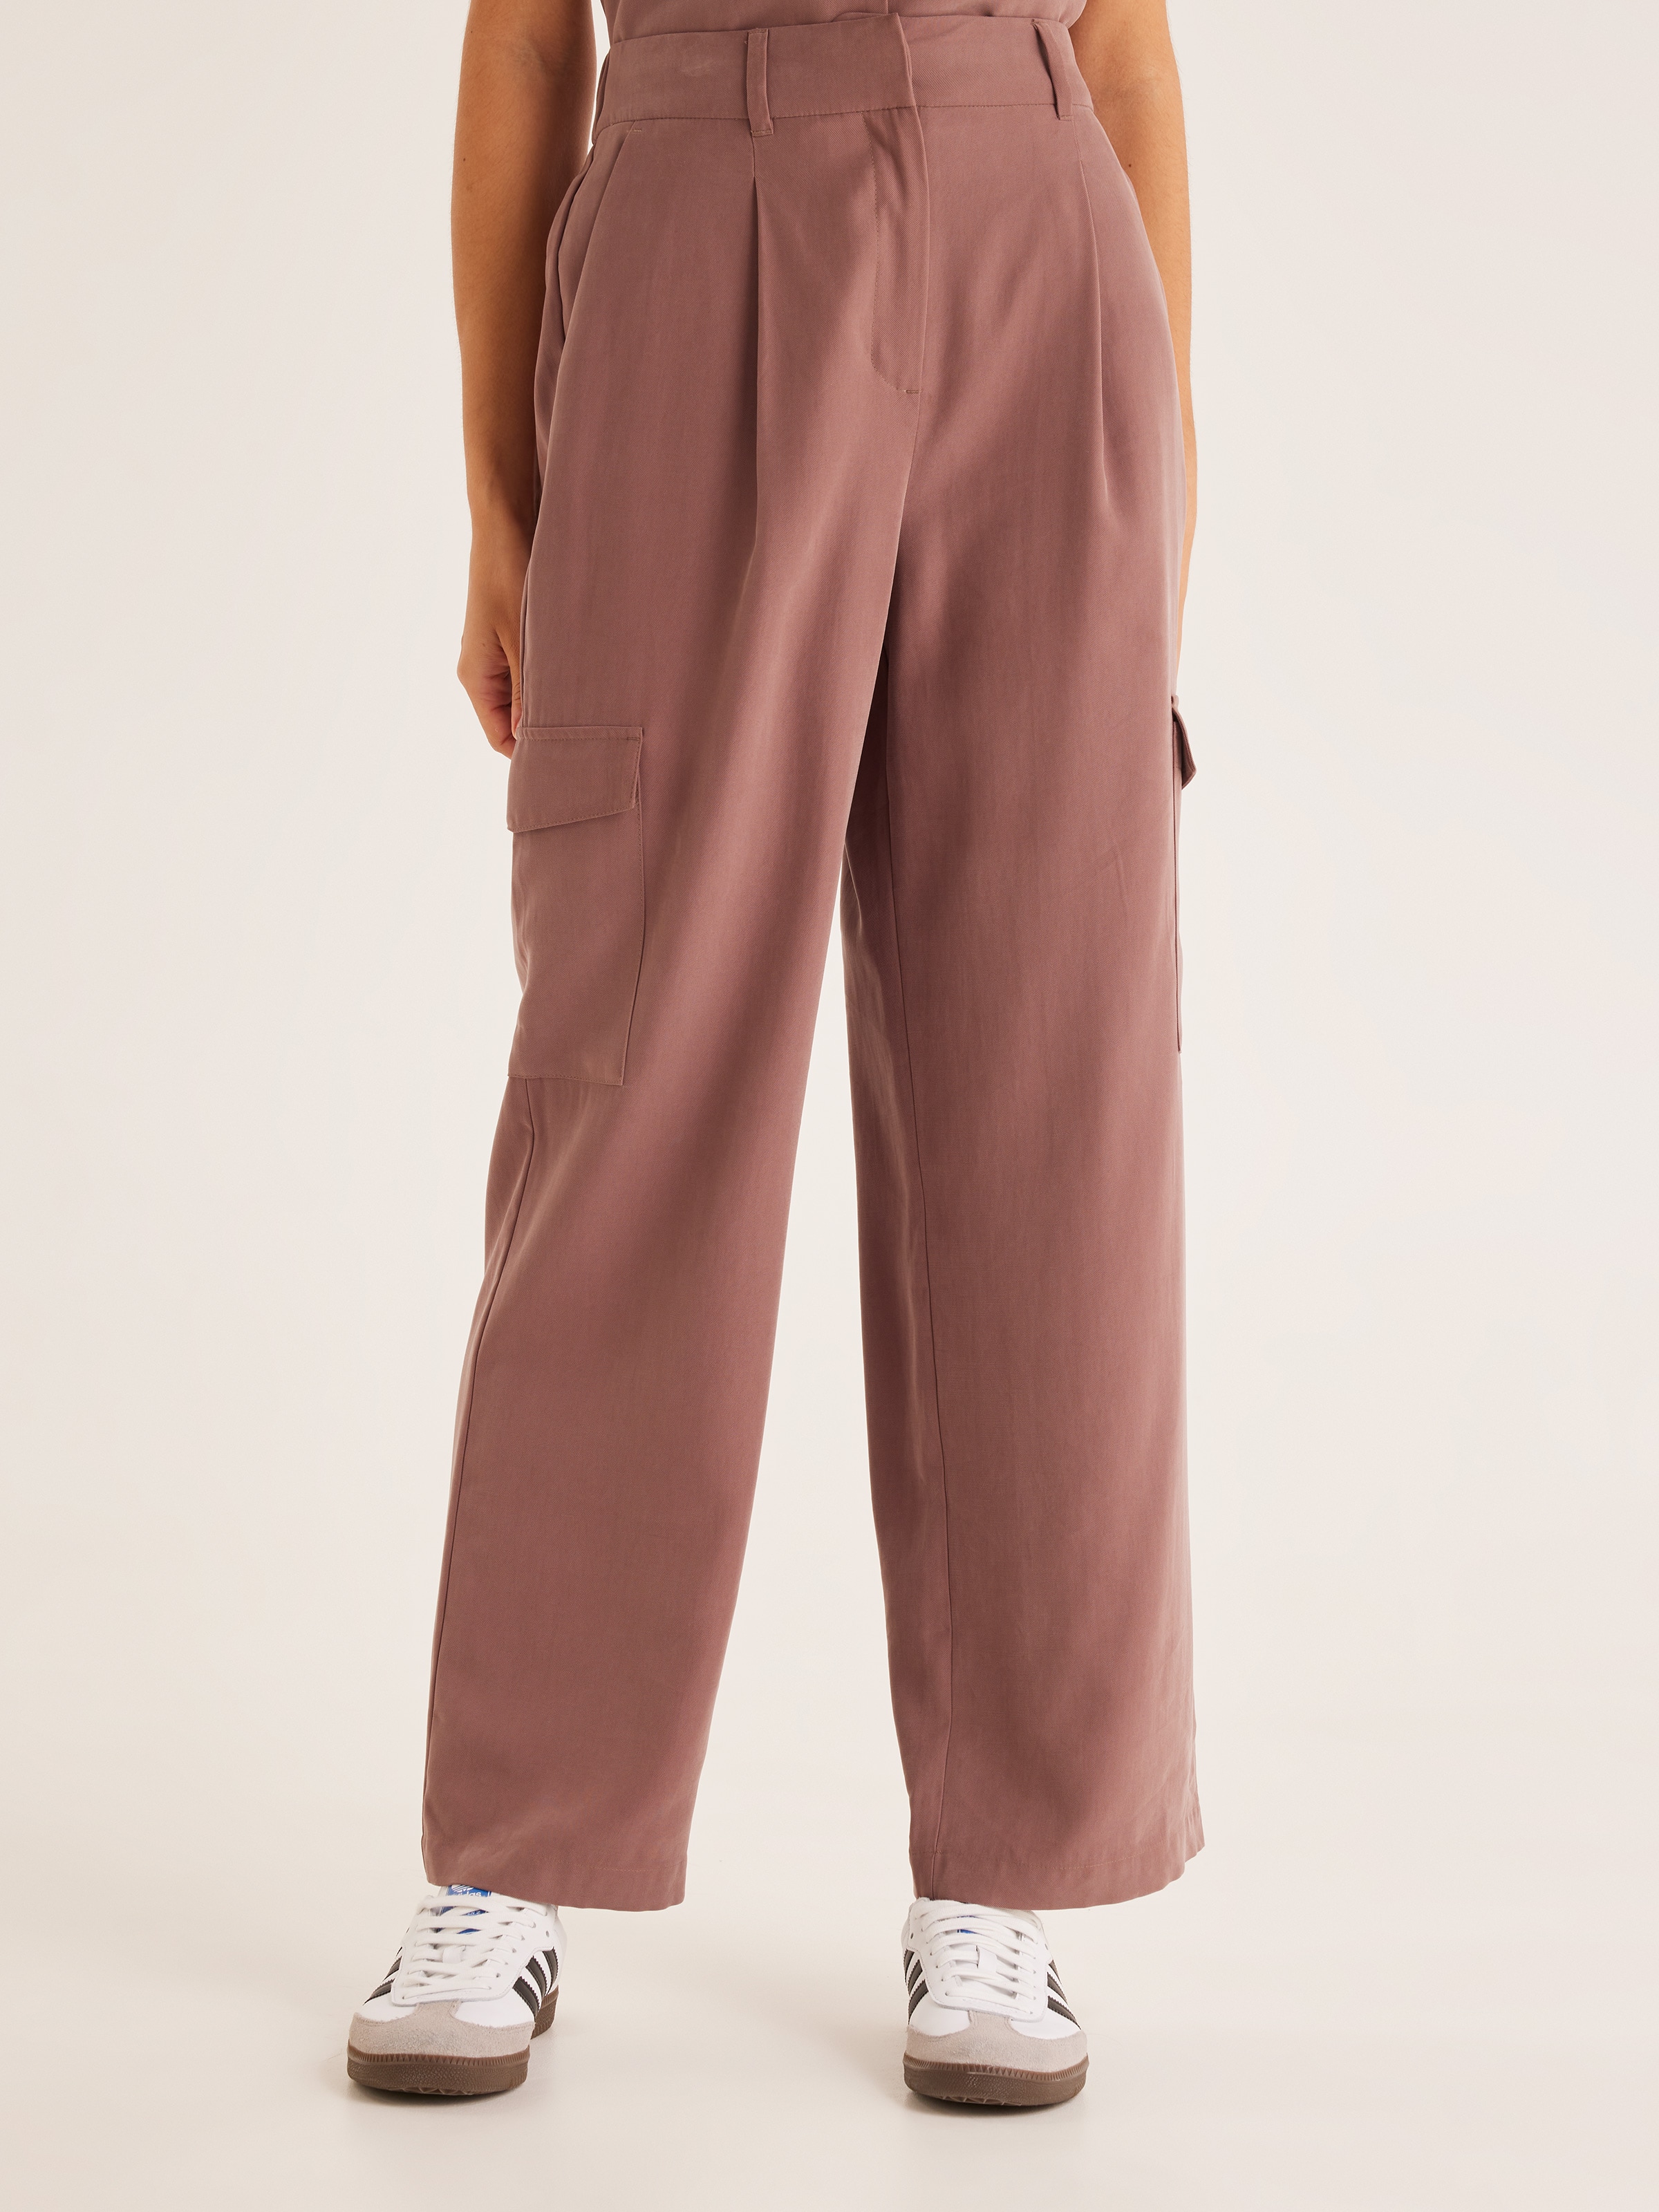 Womens Hiking Pants | Womens Hiking Clothes | The North Face NZ